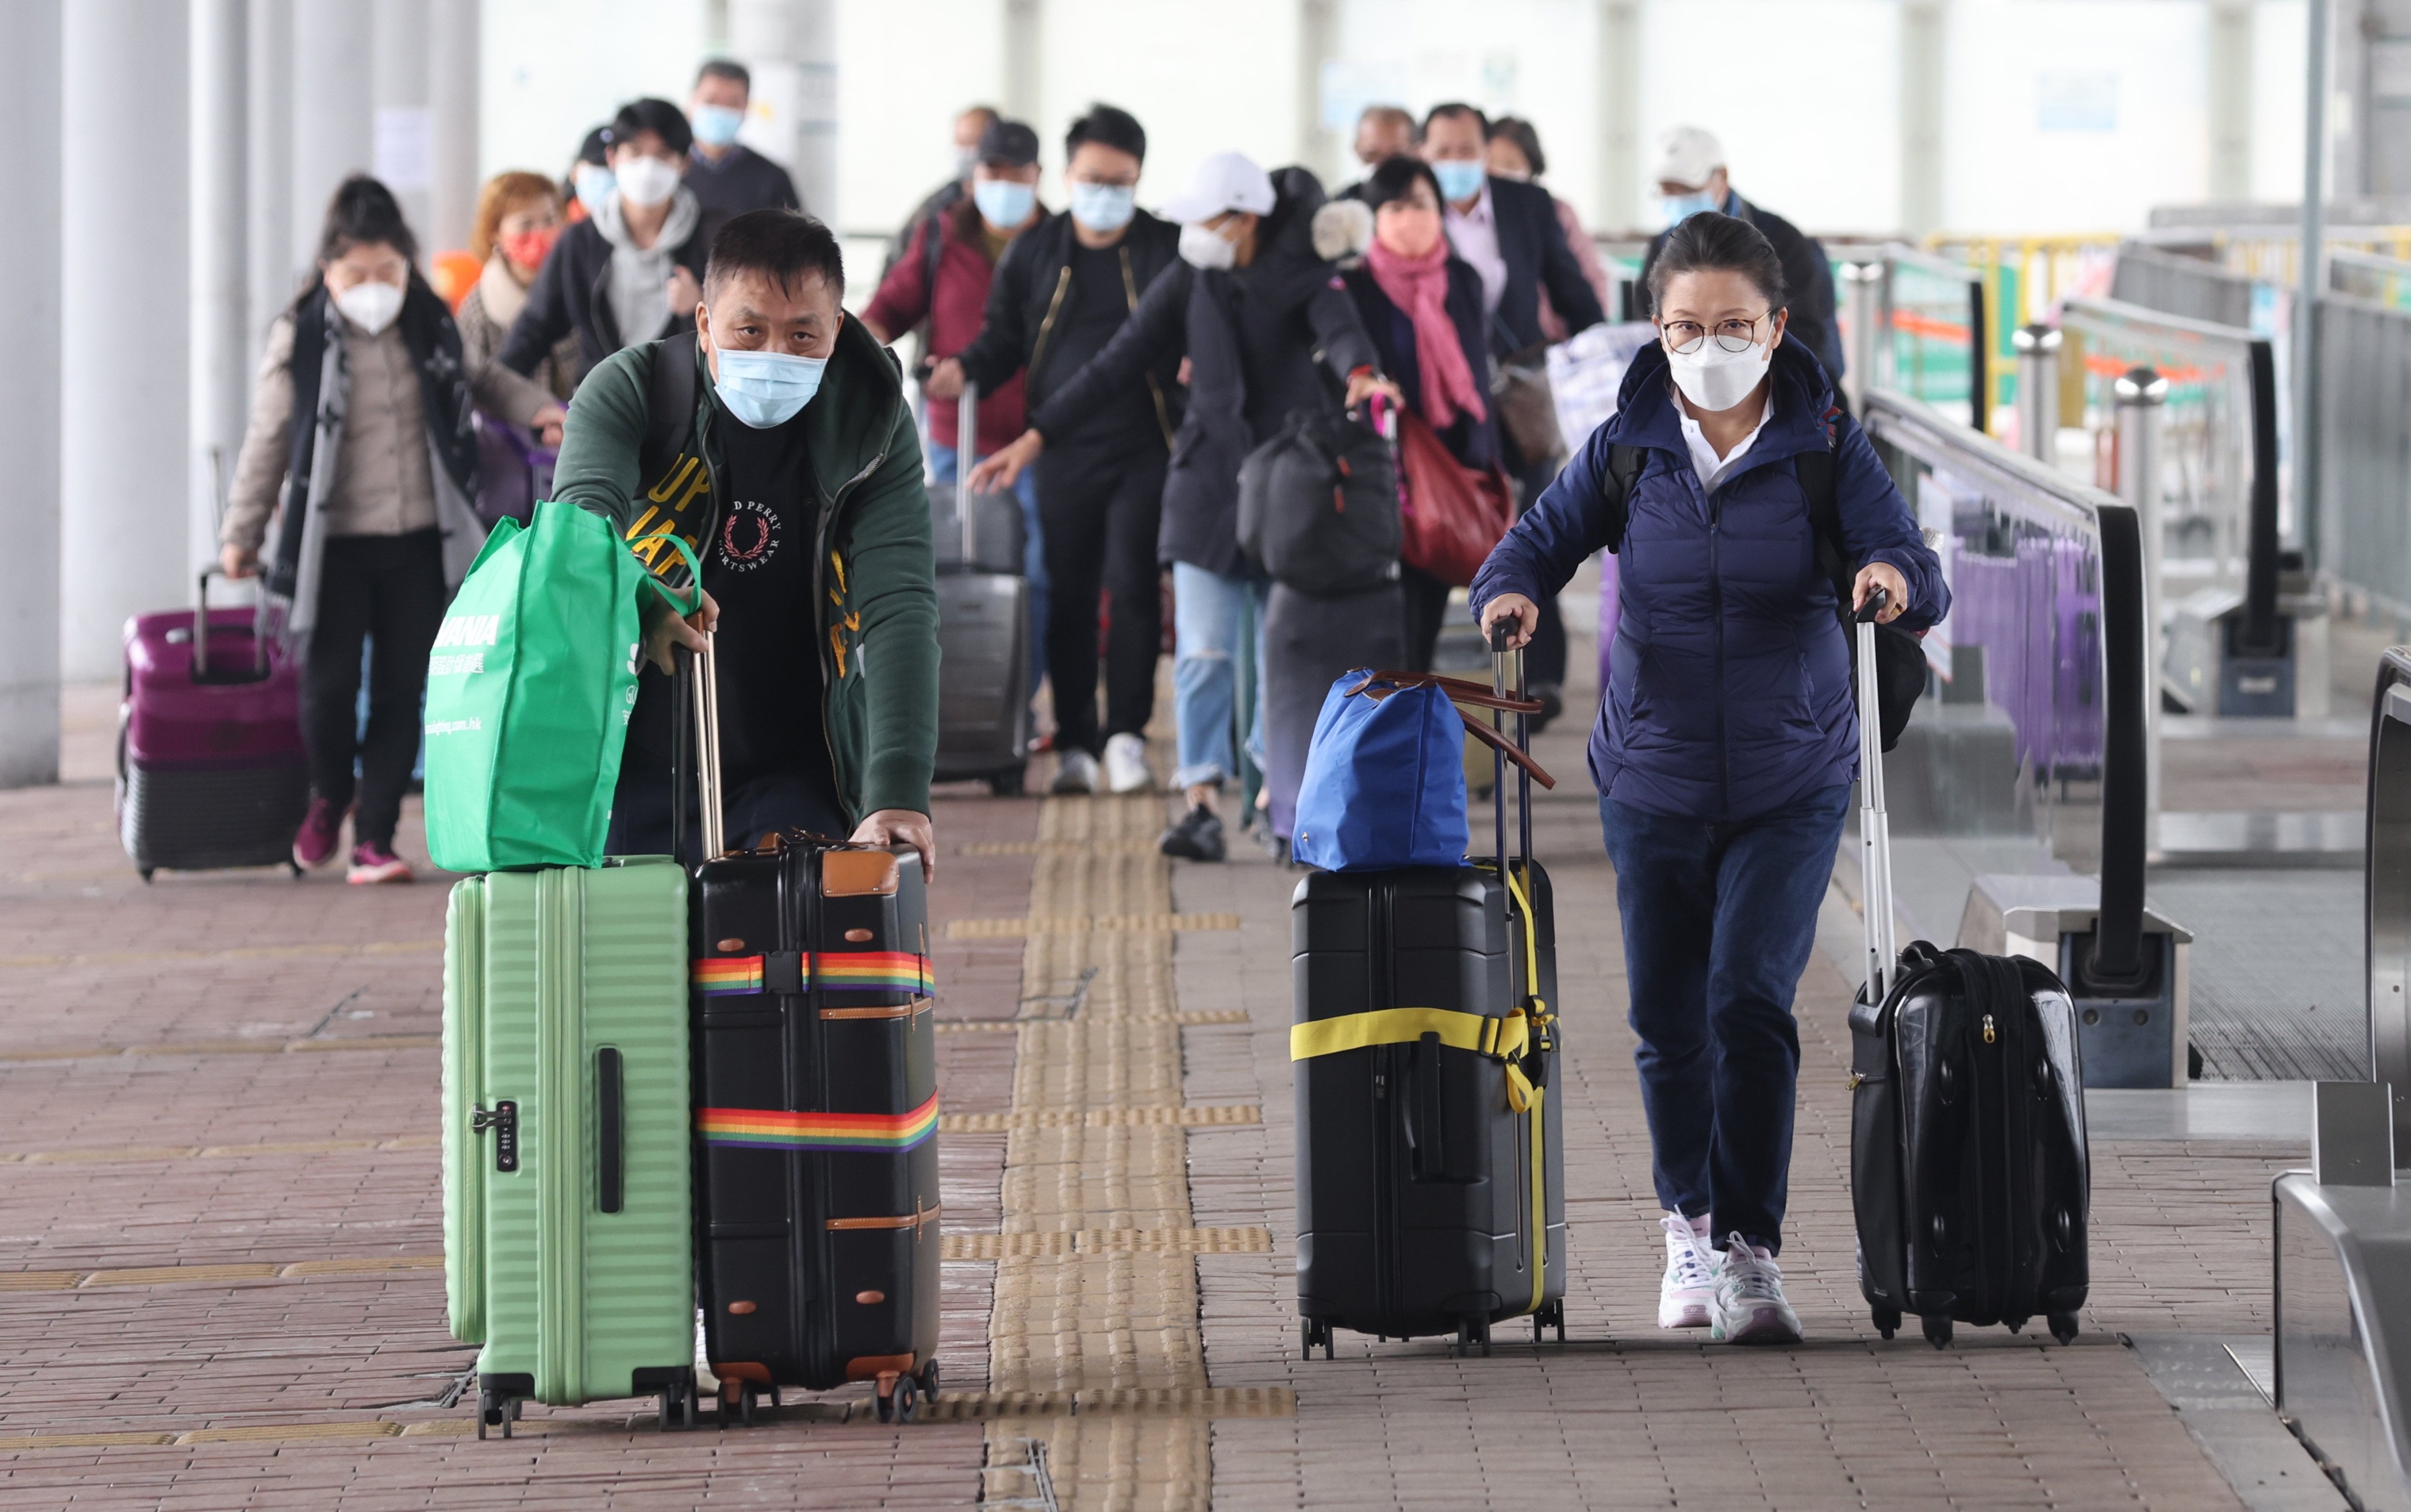 People travel across the Shenzhen Bay border on December 28, 2021. Those who have tried booking quarantine rooms across the border are likely to have encountered scalper bots. Photo: May Tse